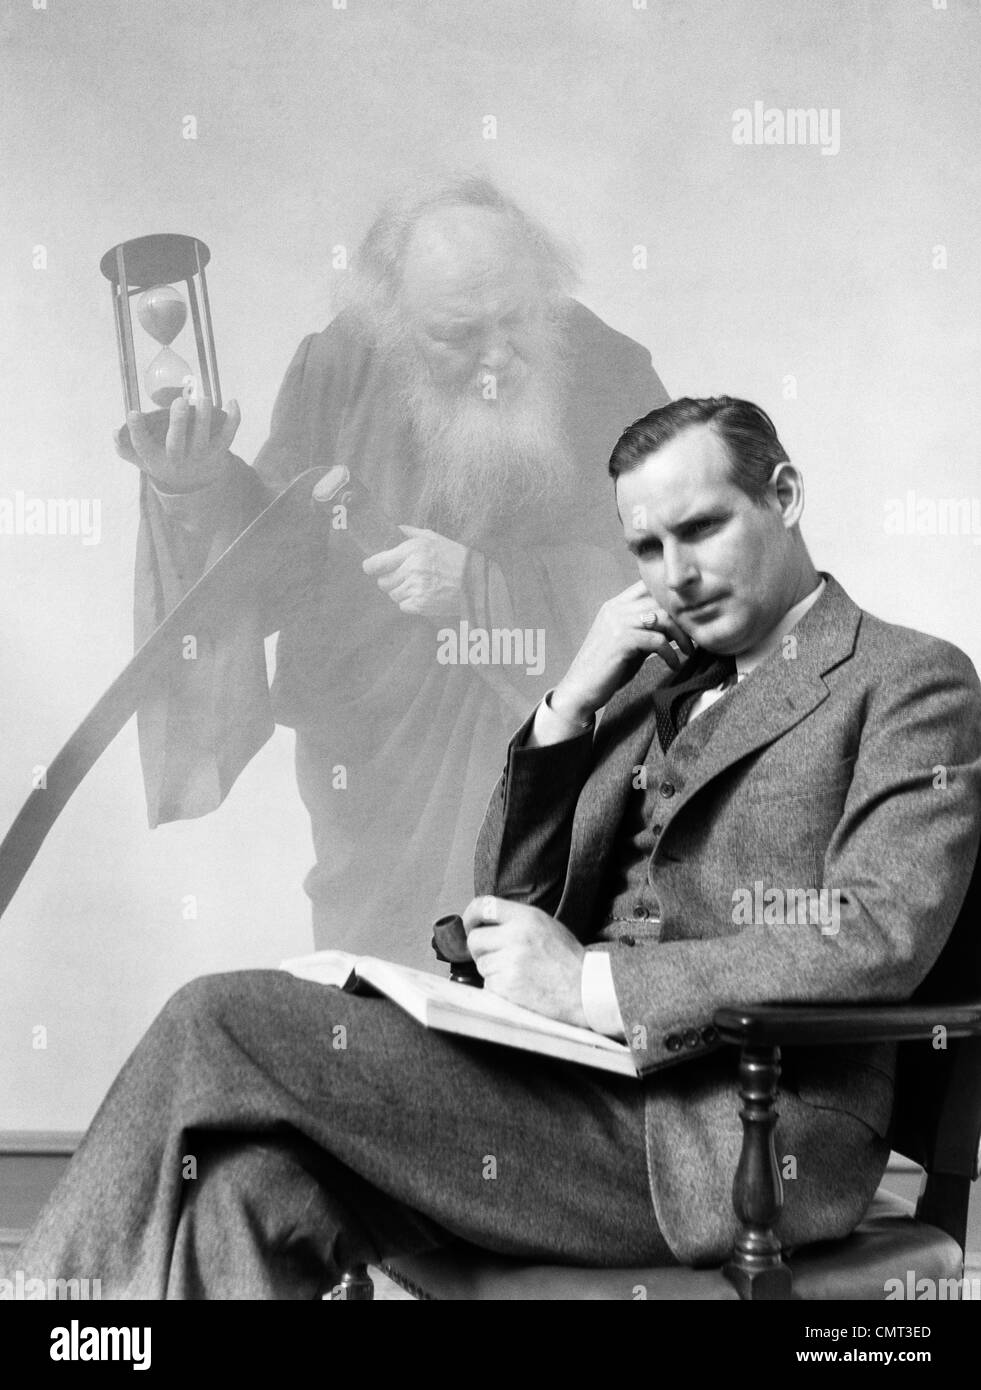 1930s MAN IN SUIT SEATED WITH BOOK IN LAP & PIPE IN HAND WITH PENSIVE LOOK WITH GRIM REAPER GHOSTED IN BACKGROUND Stock Photo